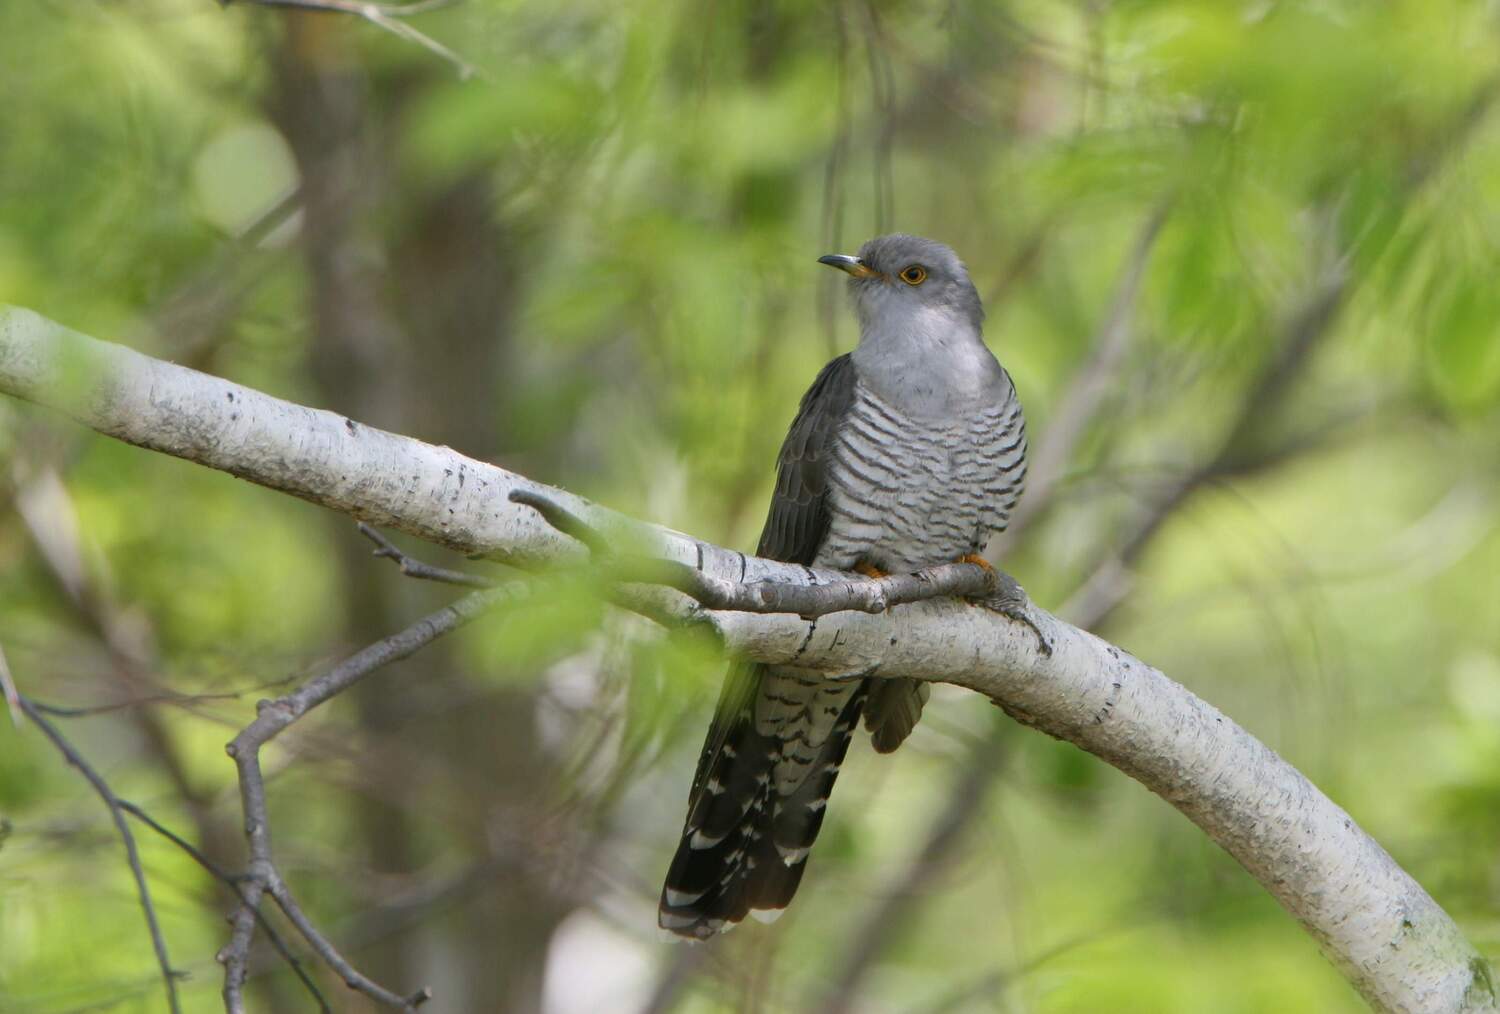 Common Cuckoo numbers are in free fall in Germany and Europe. Their insistent and well-known song features prominently in human culture